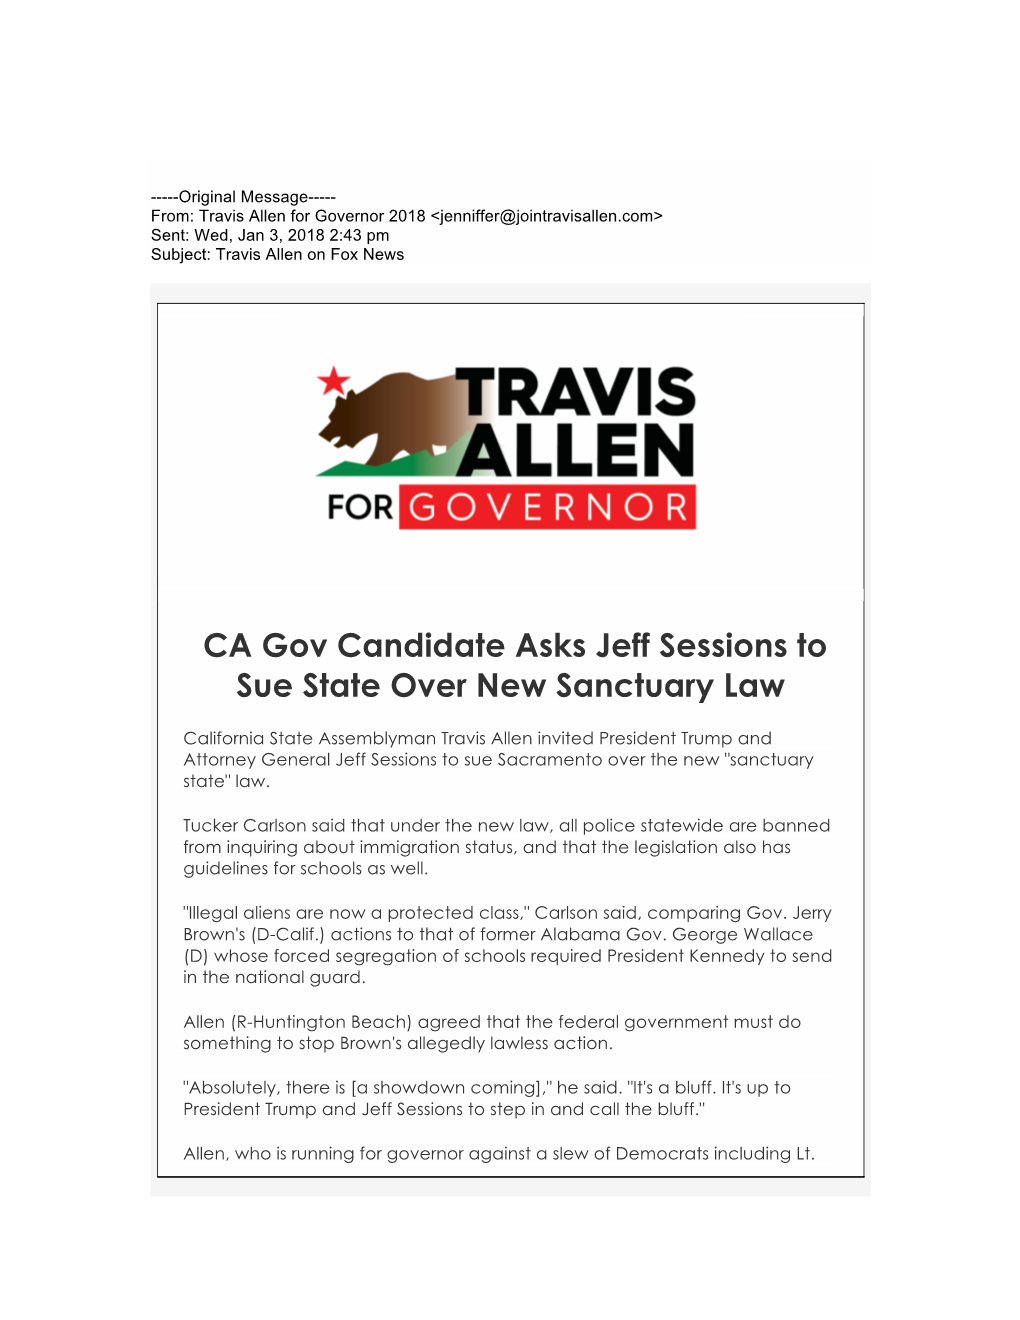 CA Gov Candidate Asks Jeff Sessions to Sue State Over New Sanctuary Law